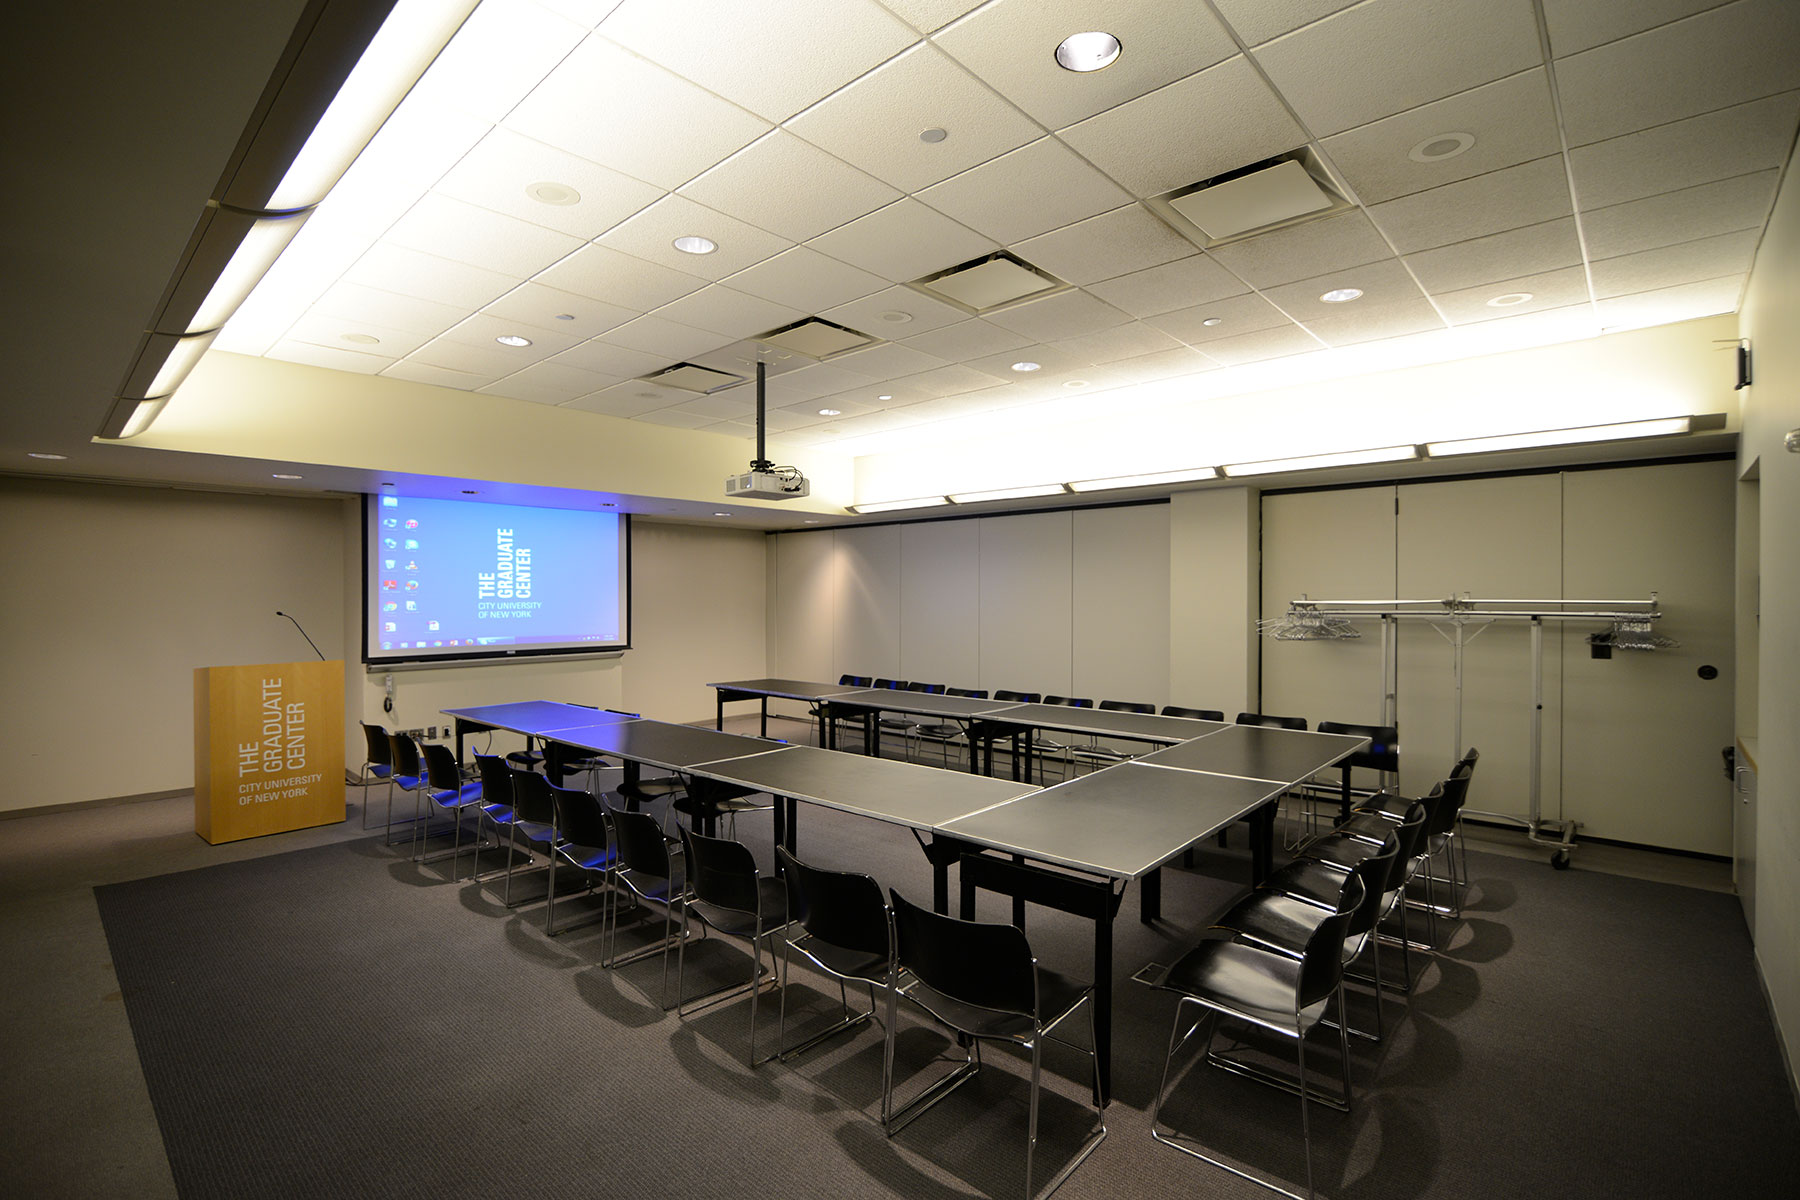 9th Floor Conference Room Suite - Meeting Space in NYC. Room set up for a class or meeting - U-shaped desks.